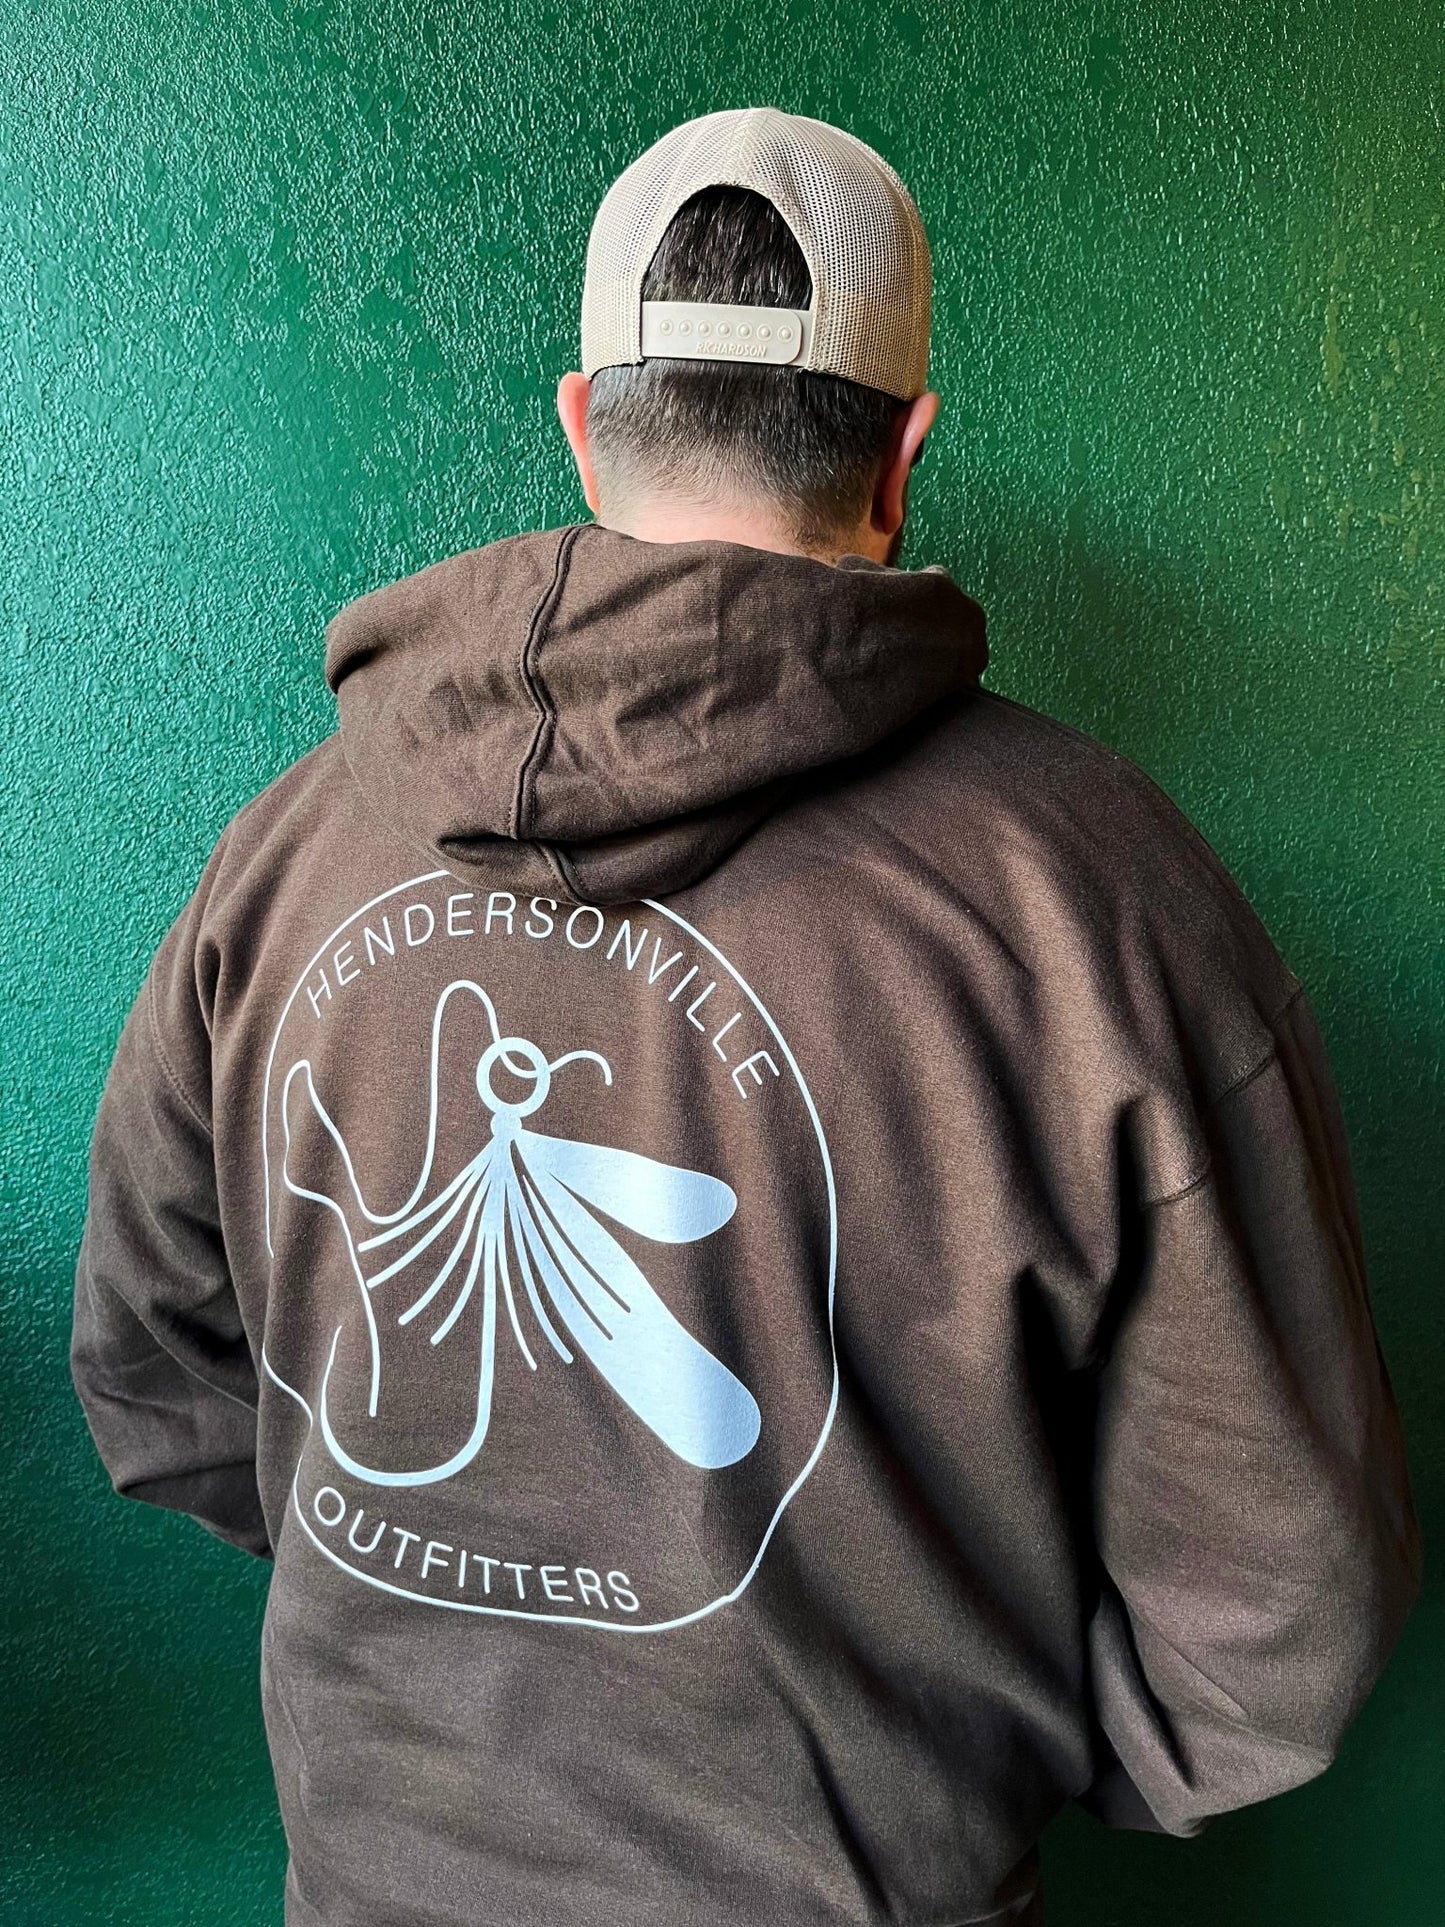 Hendersonville Outfitters Cotton Hoodies